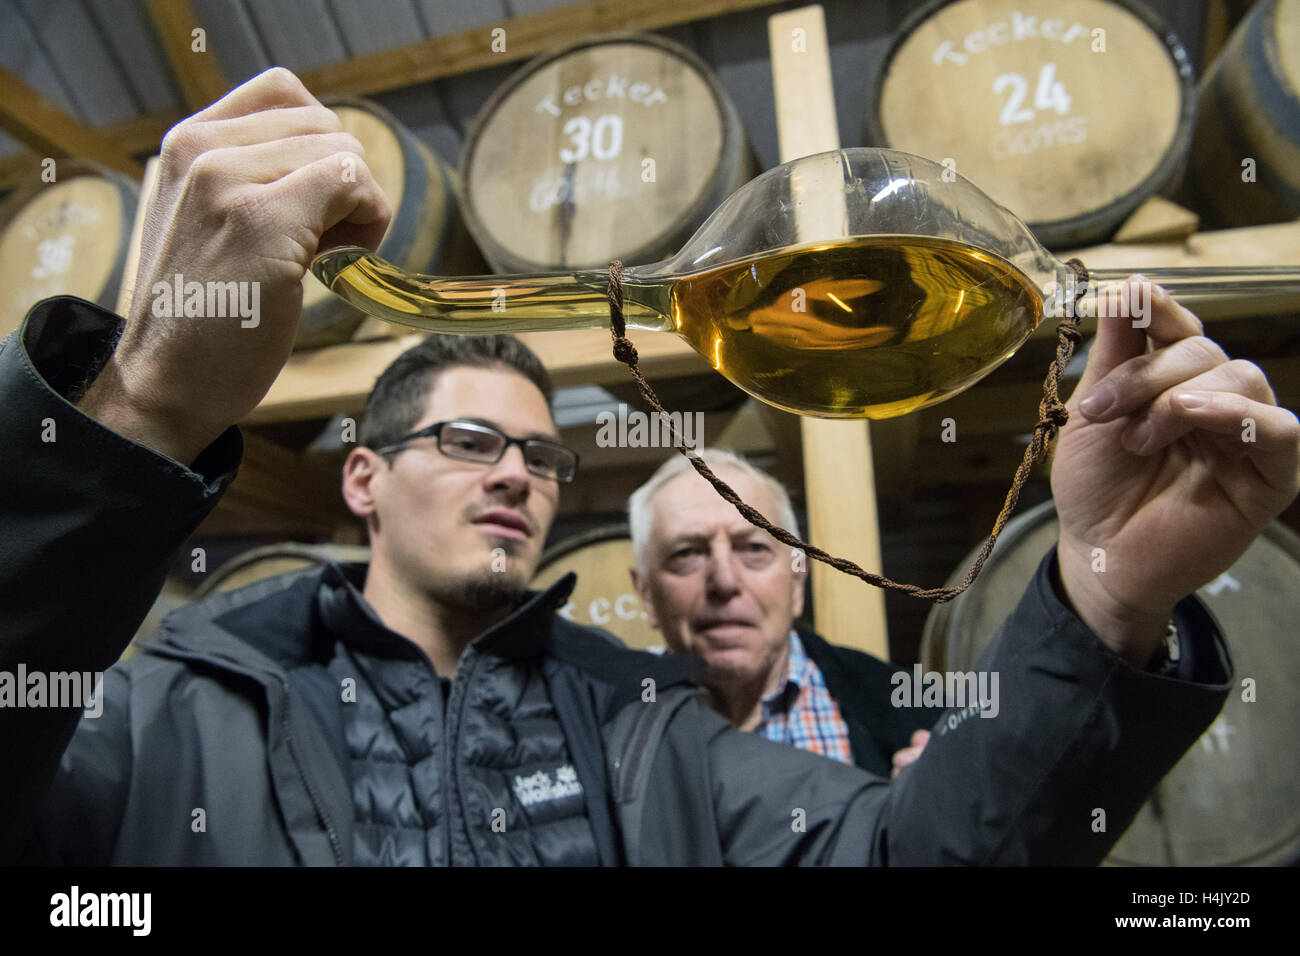 Owen, Germany. 13th Oct, 2016. Christian Gruel (r) and his grandson Immanuel Gruel look at a whisky-lifter in the whisky barrel cellar of spirits distillery Gruel in Owen, Germany, 13 October 2016. PHOTO: MARIJAN MURAT/dpa/Alamy Live News Stock Photo